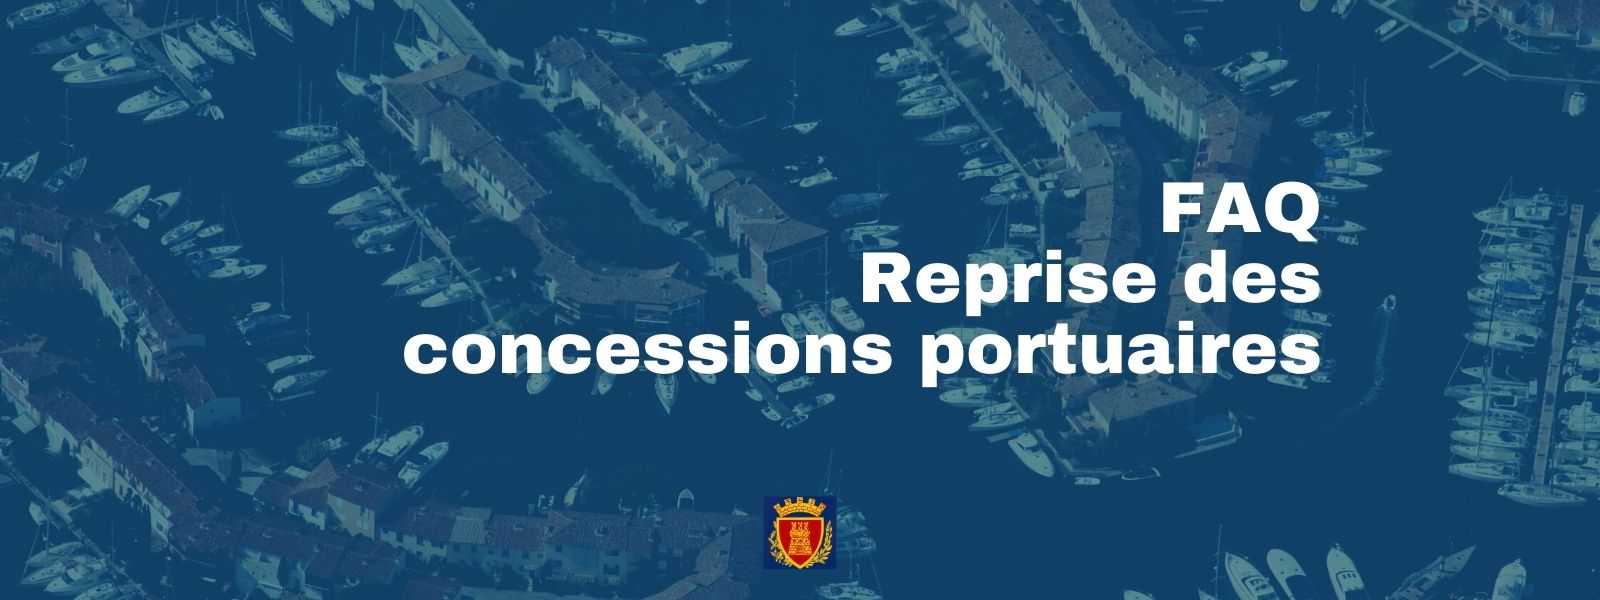 Frequently asked questions: termination of port concessions of PG I, PG II and SNPG